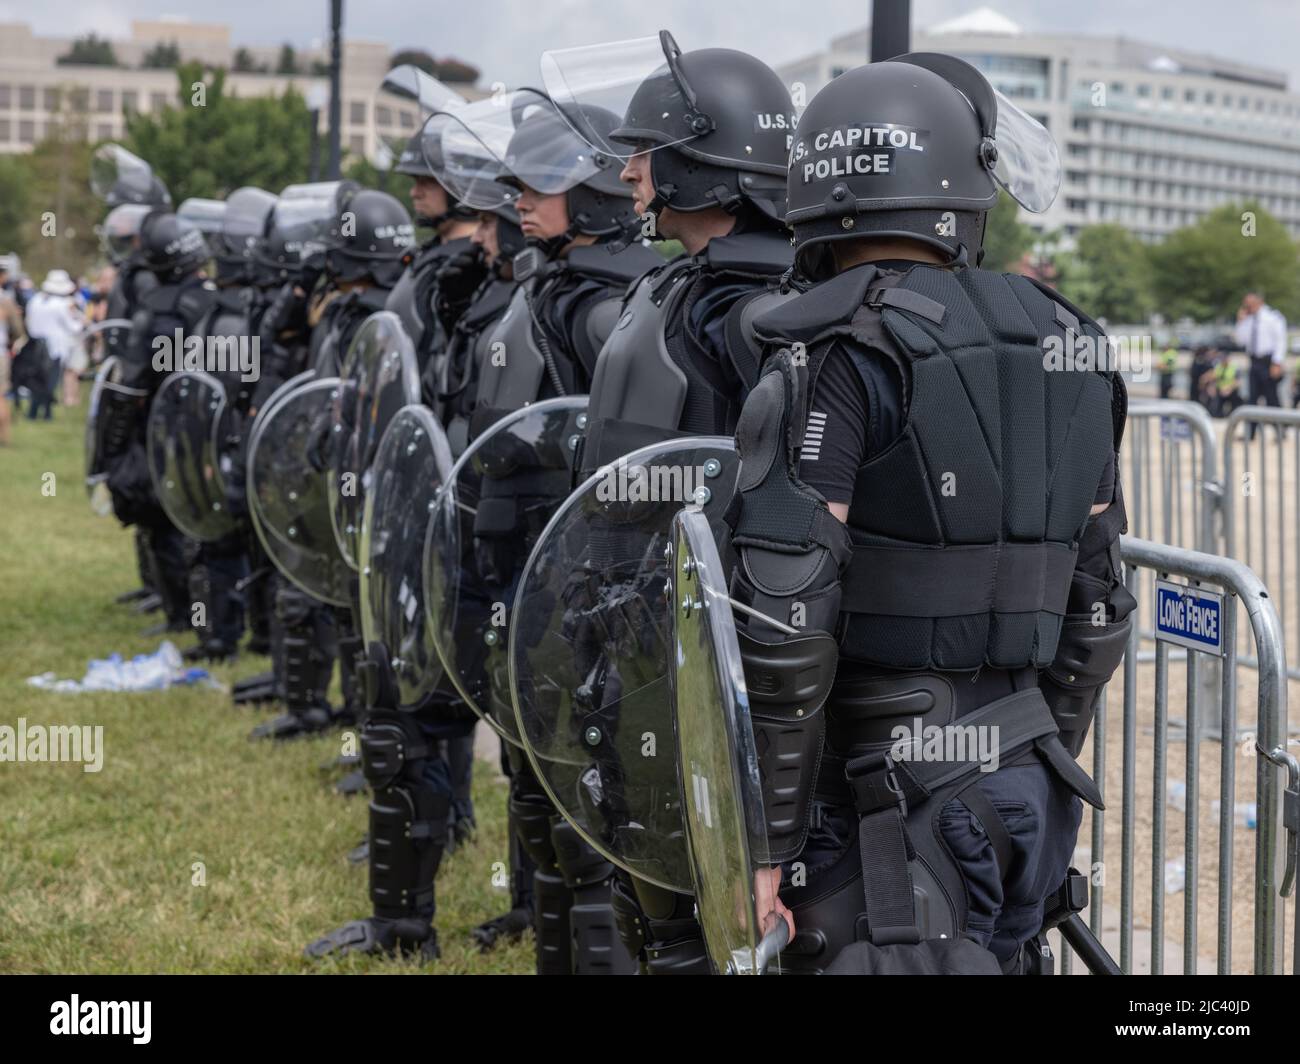 WASHINGTON, D.C. – September 18, 2021: United States Capitol Police officers are seen during a “Justice for J6” rally near the United States Capitol. Stock Photo